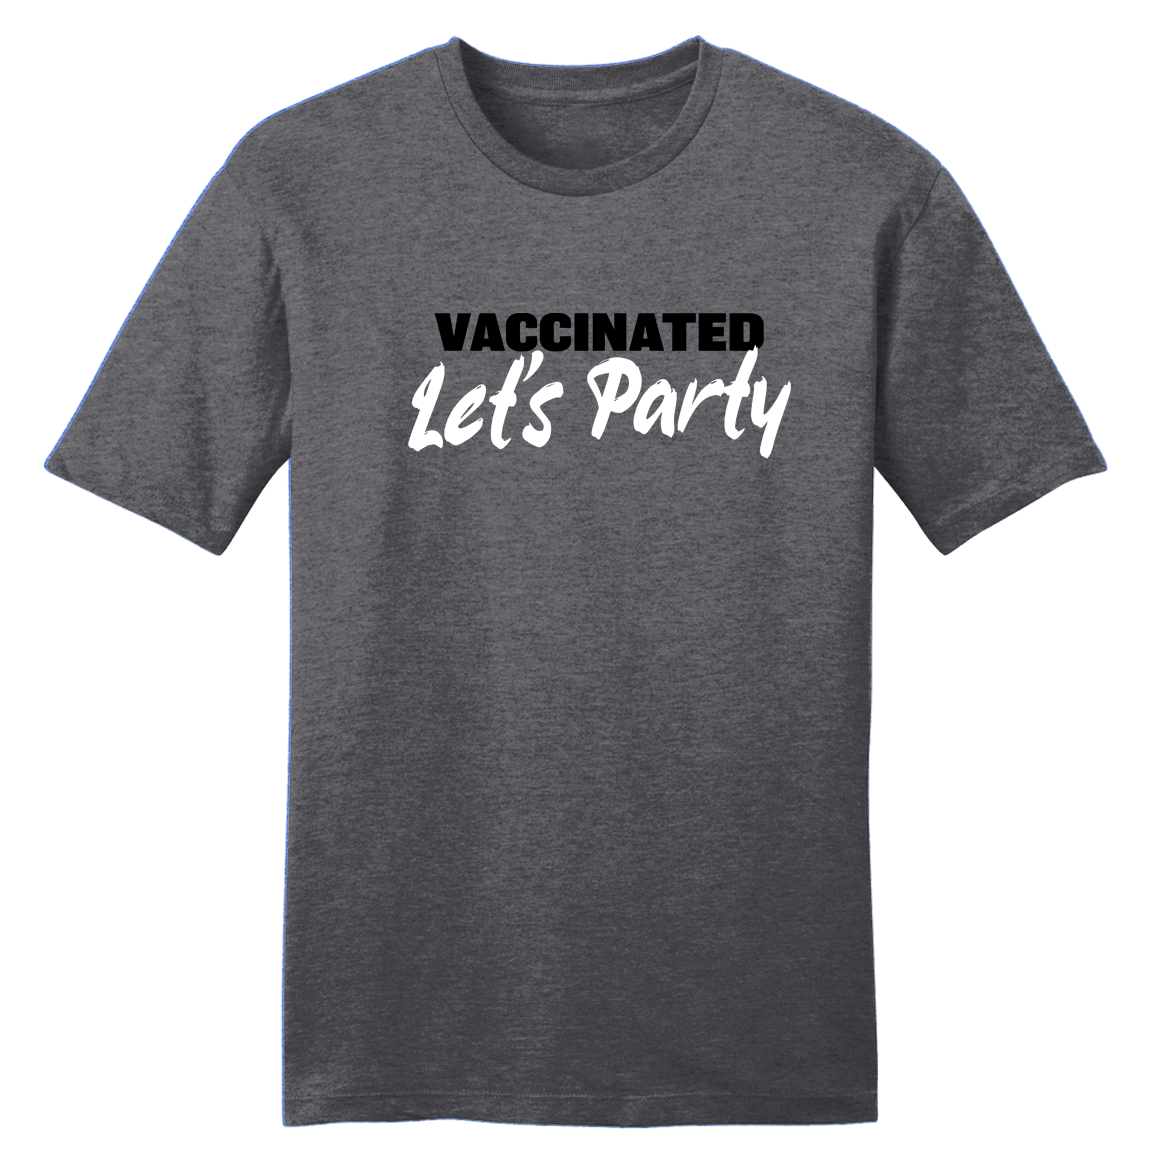 Vaccinated Let's Party - Cincy Shirts